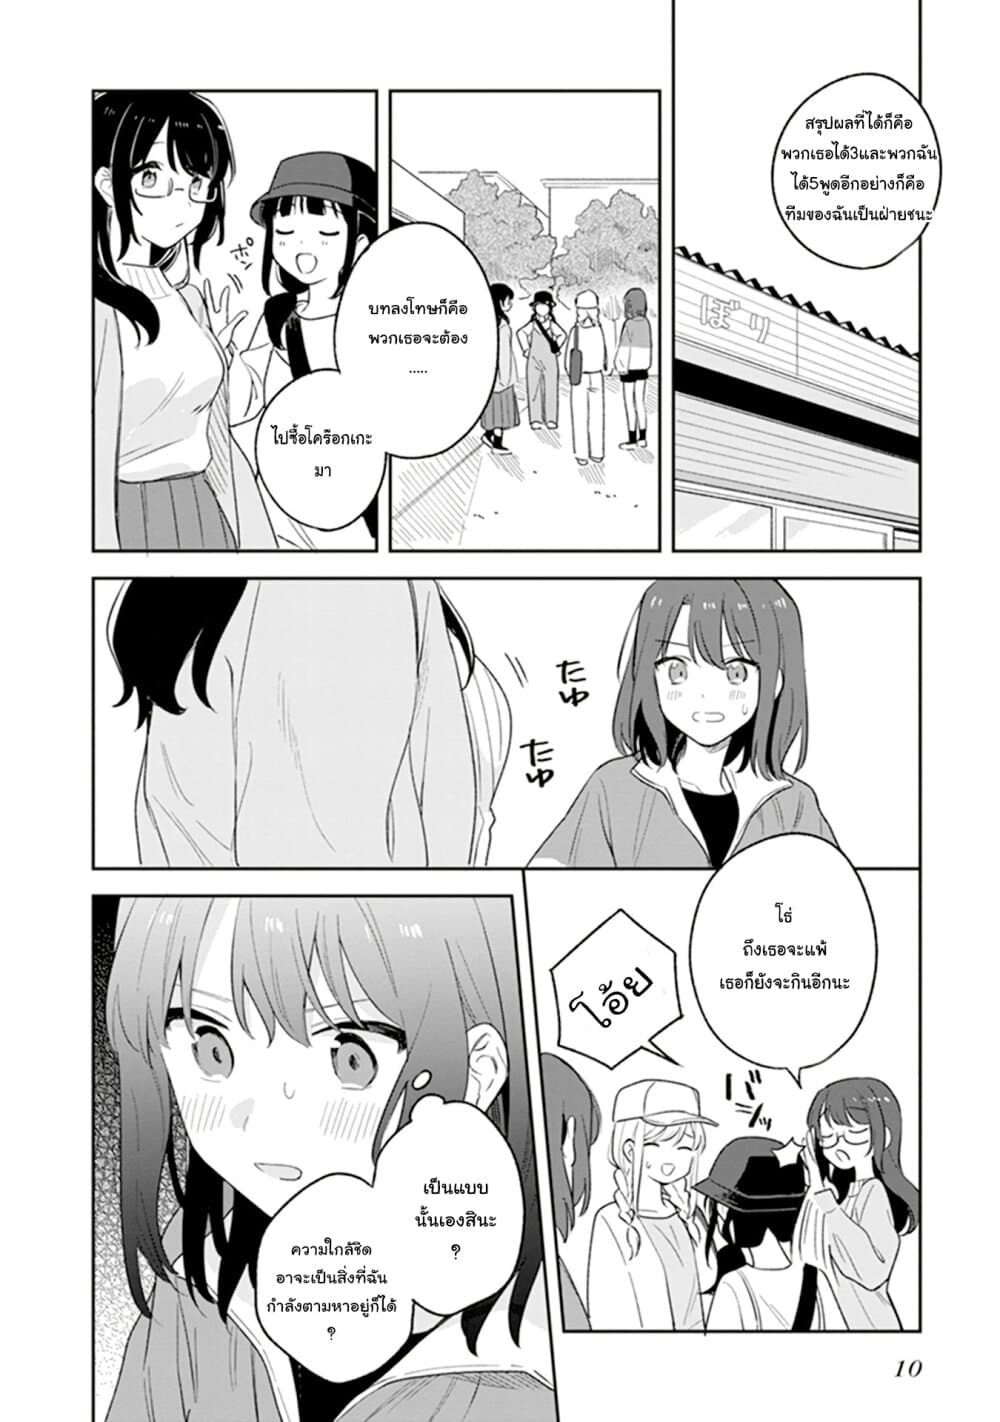 Adachi-to-Shimamura-Official-Comic-Anthology-Chapter1-12.jpg